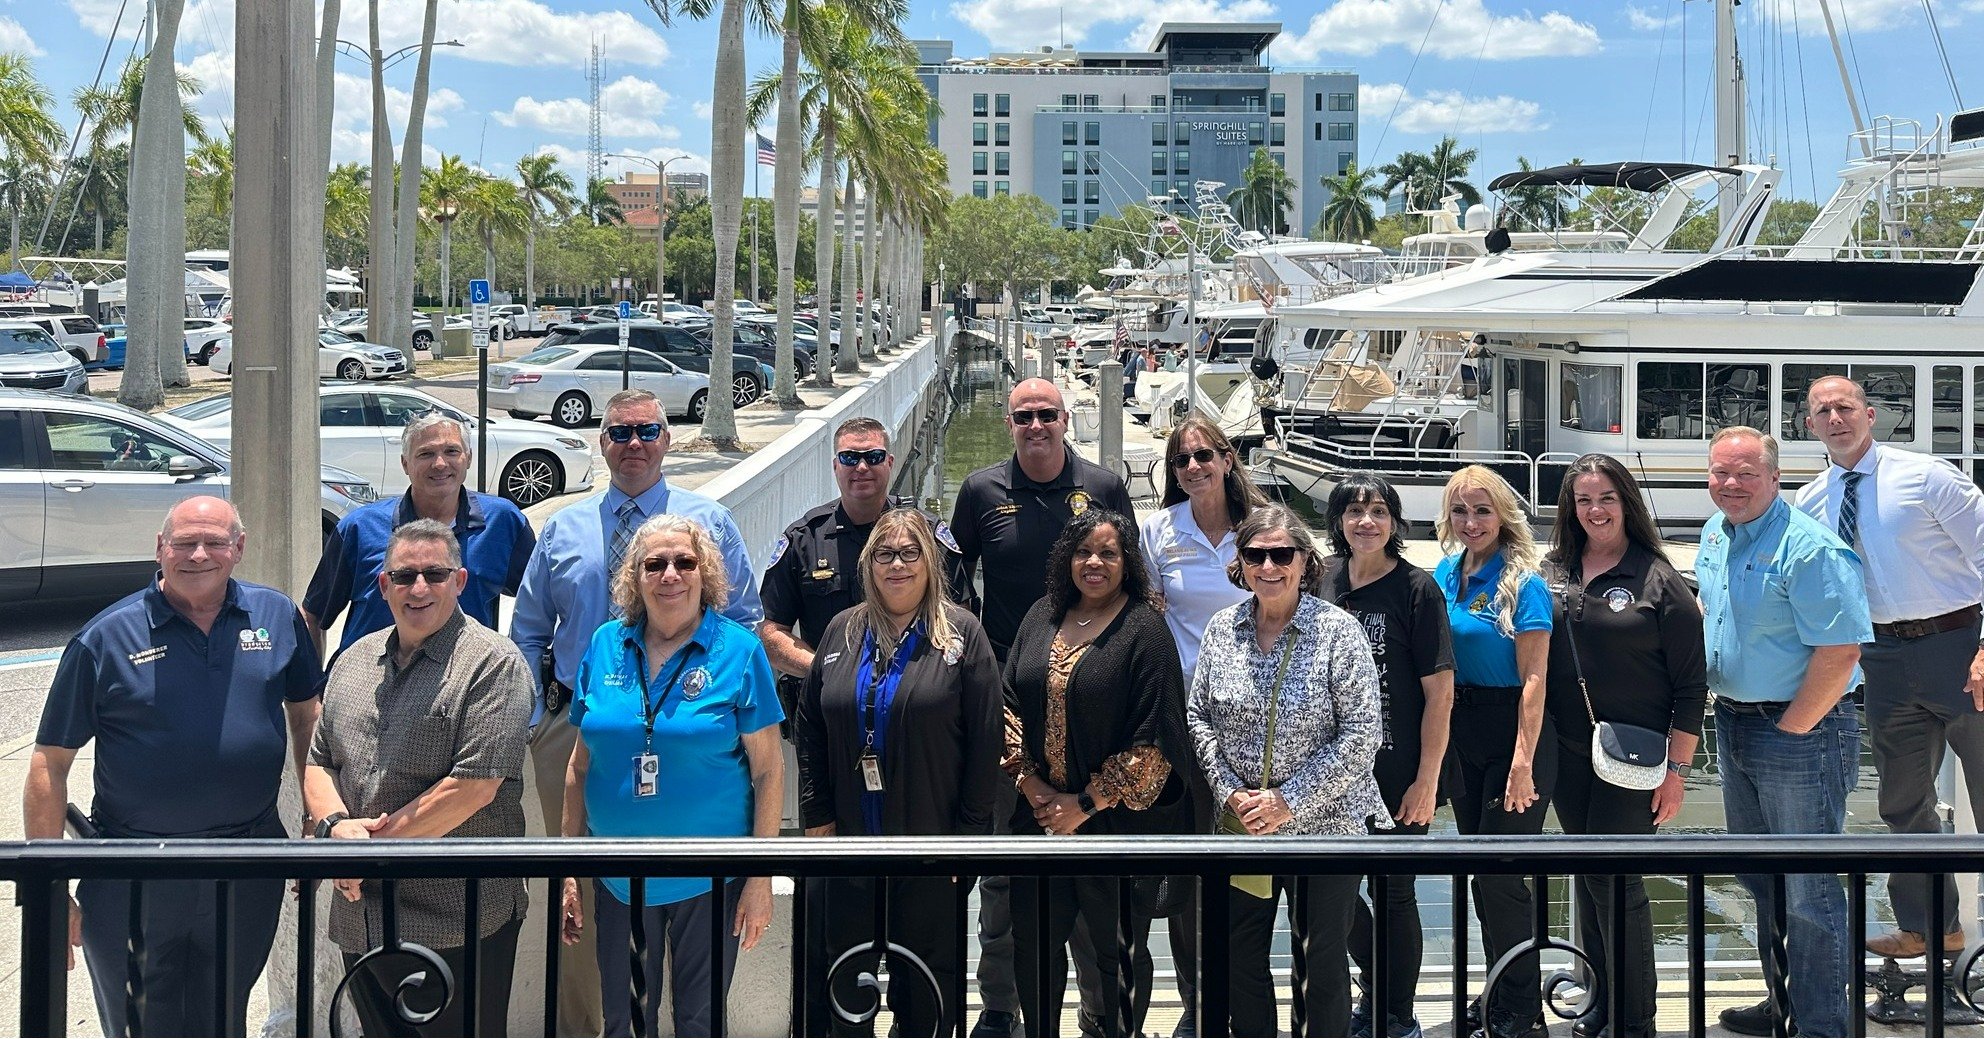 We wrapped up #NationalVolunteerWeek with a celebration lunch to recognize the dedicated men and women who generously give their time to BPD. Our volunteers worked more than 1,000 hours in 2023. A huge thank you to Pastor Don Sturiano, Jan Ludwig, Da